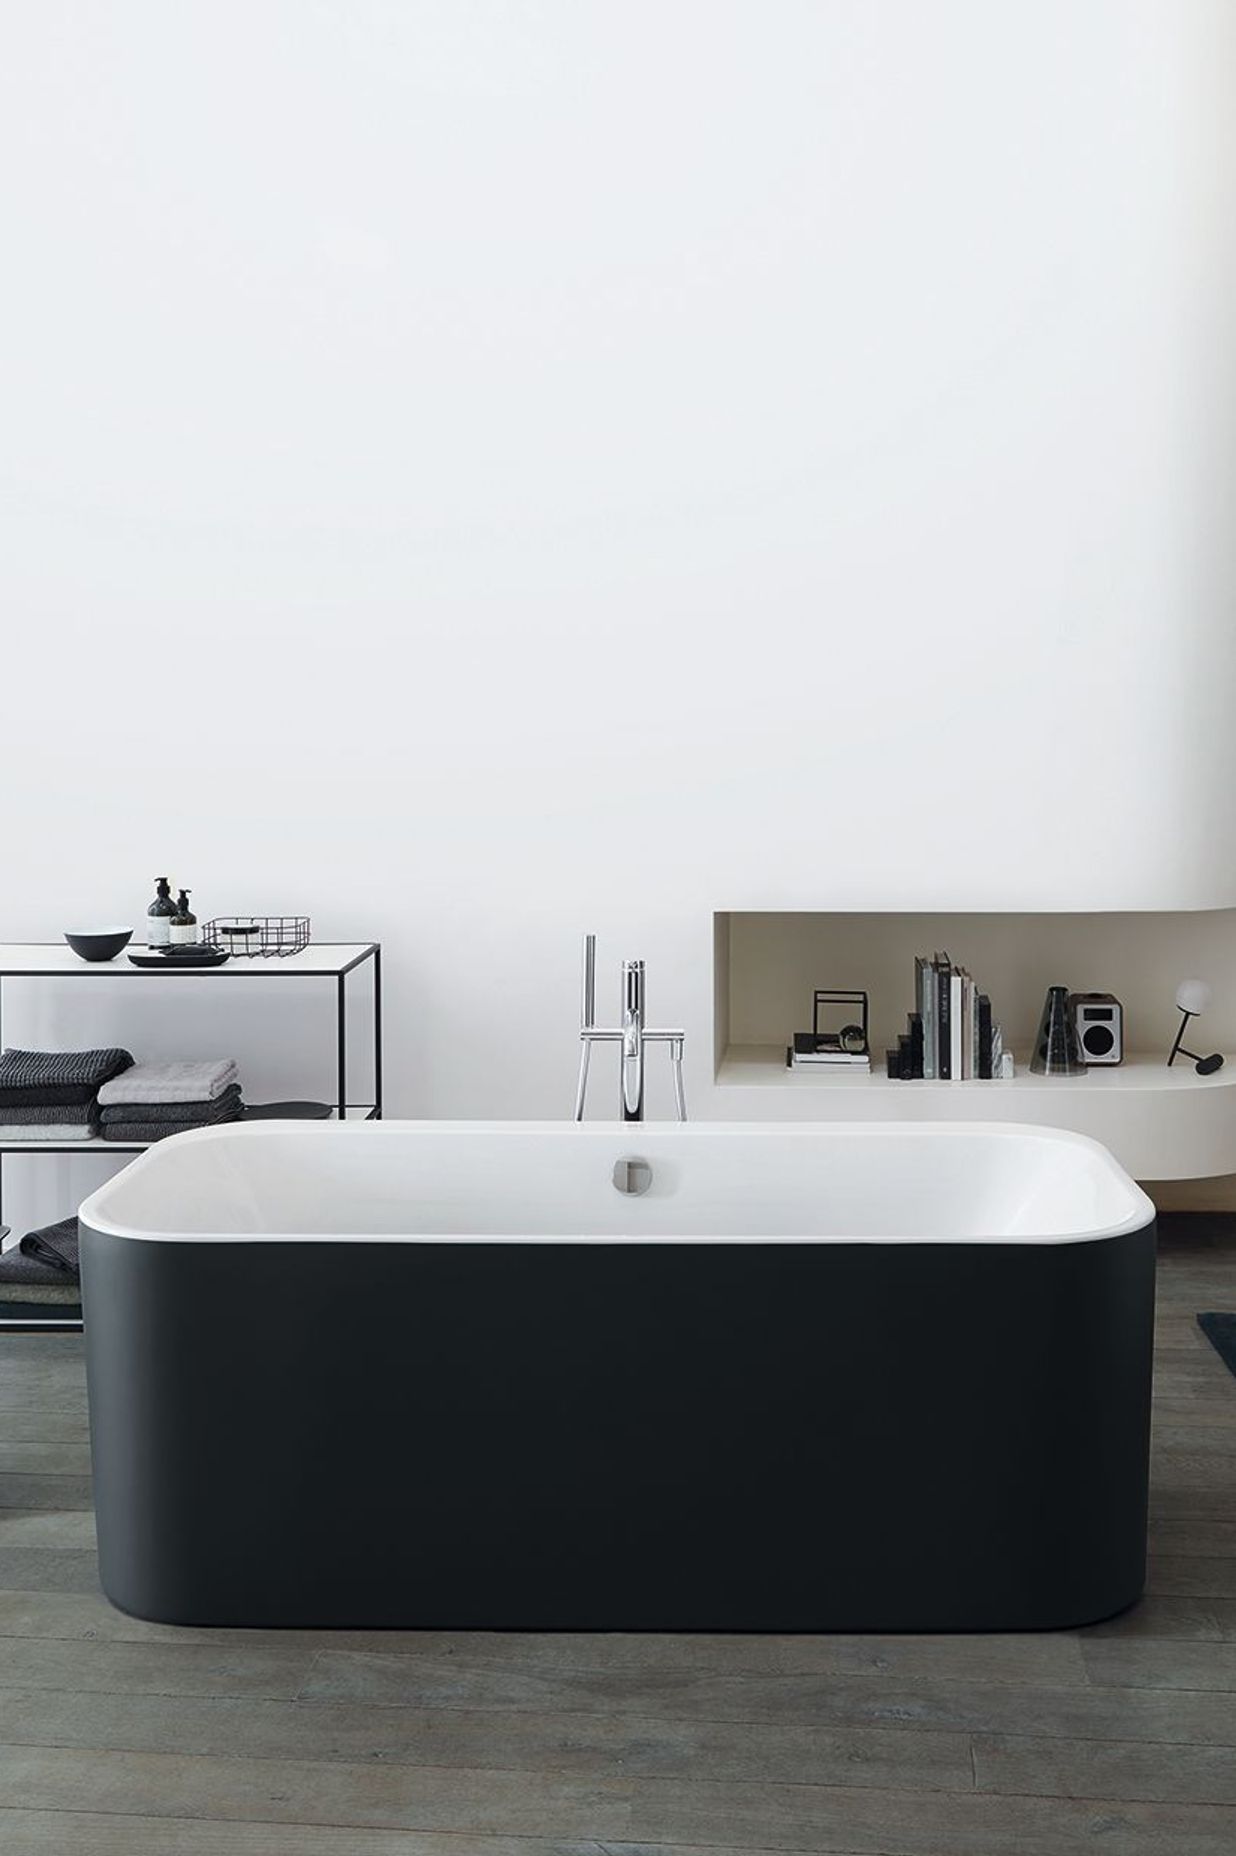 This matte black tub is available in the Happy D.2 Plus Bathroom Collection.